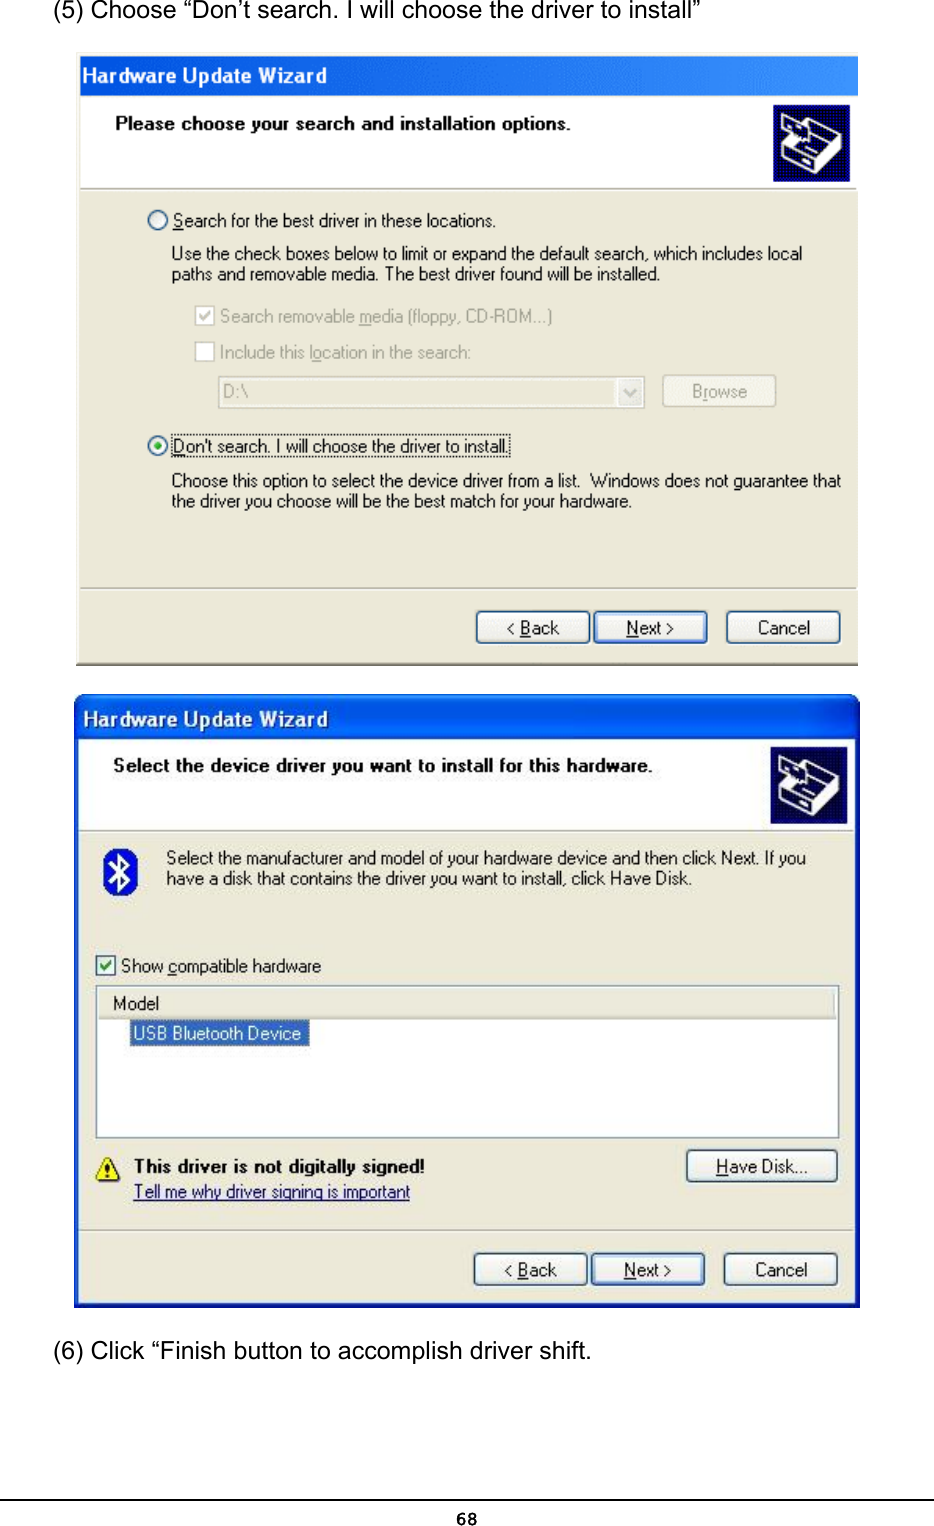   68(5) Choose “Don’t search. I will choose the driver to install”   (6) Click “Finish button to accomplish driver shift. 